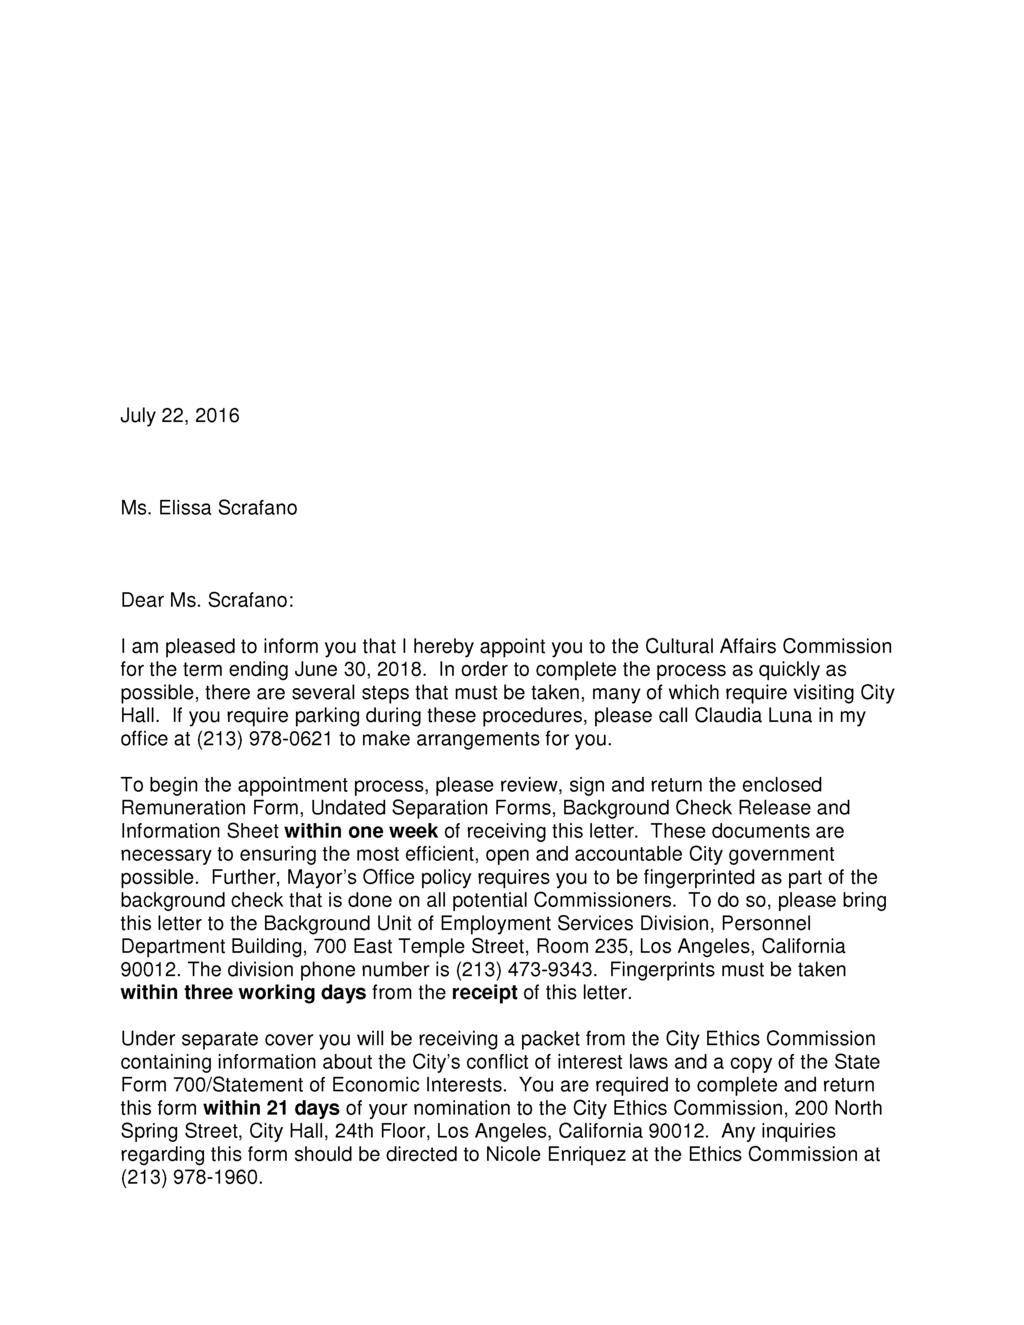 July 22, 2016 Ms. Elissa Scrafano Dear Ms. Scrafano: I am pleased to inform you that I hereby appoint you to the Cultural Affairs Commission for the term ending June 30, 2018.